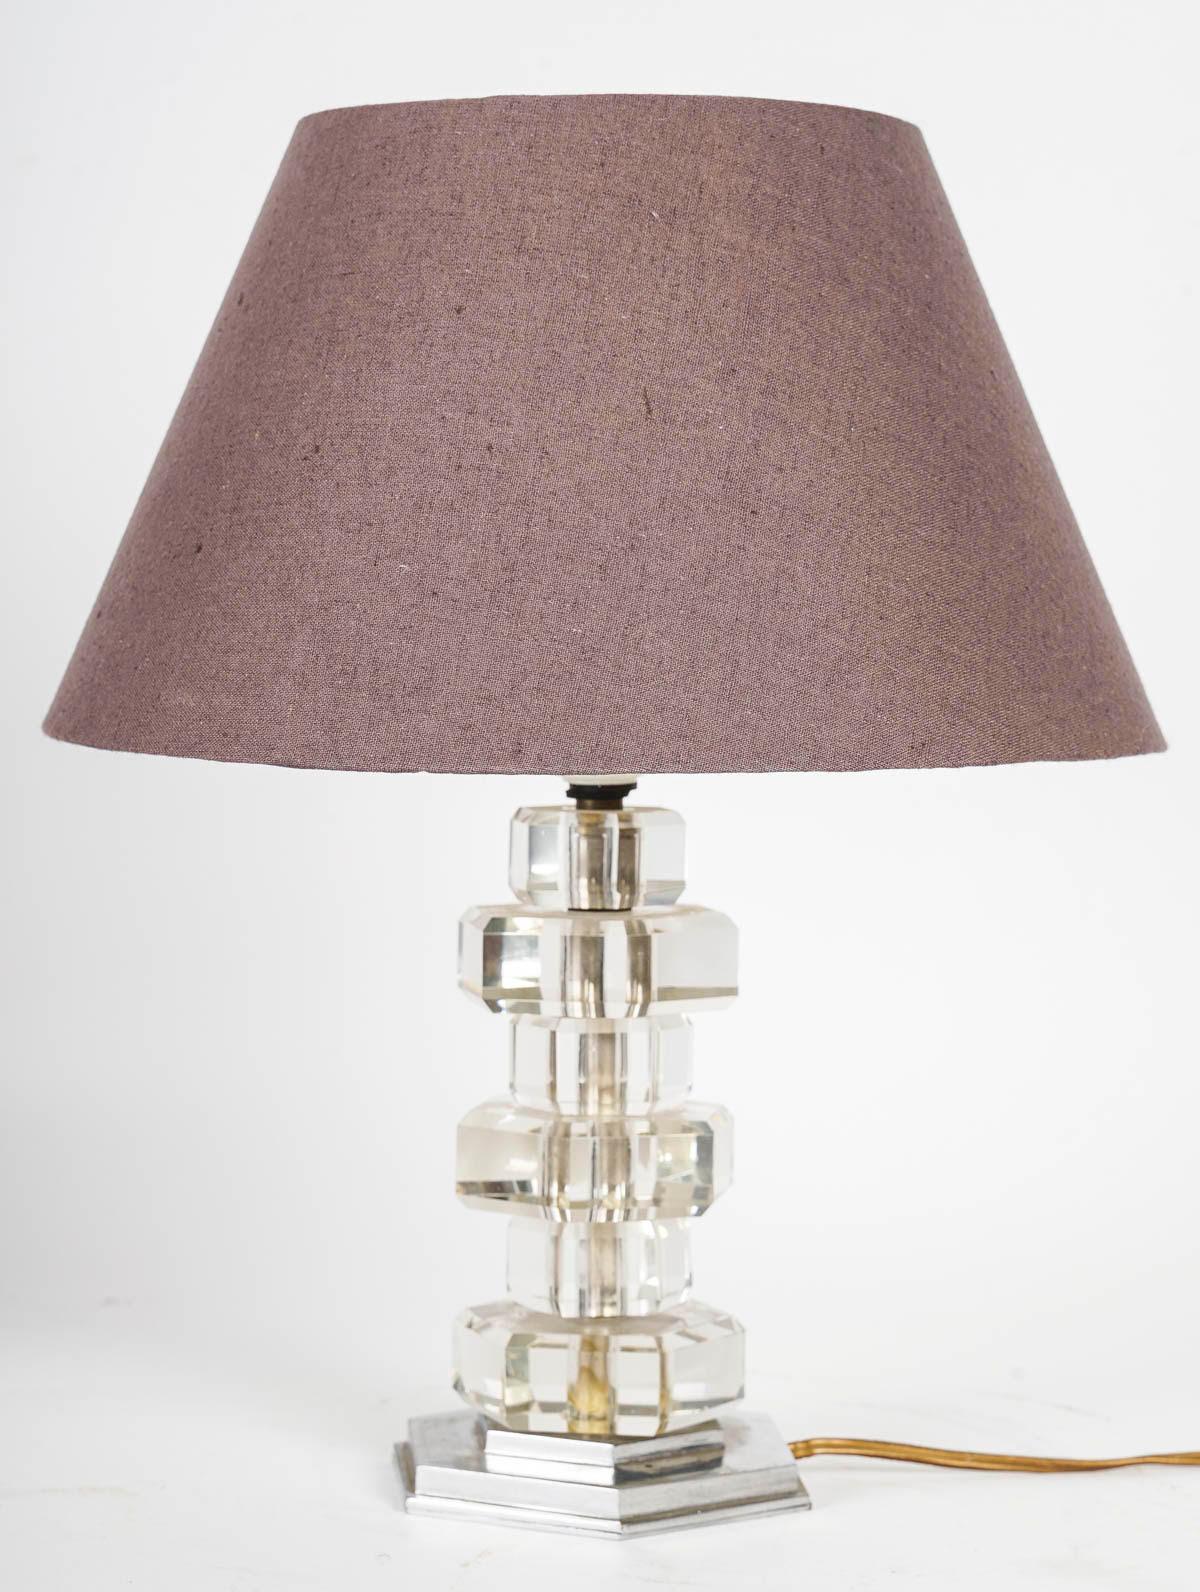 20th Century Table Lamp by the Artist Henri Morand, 1940, Modernist Style. For Sale